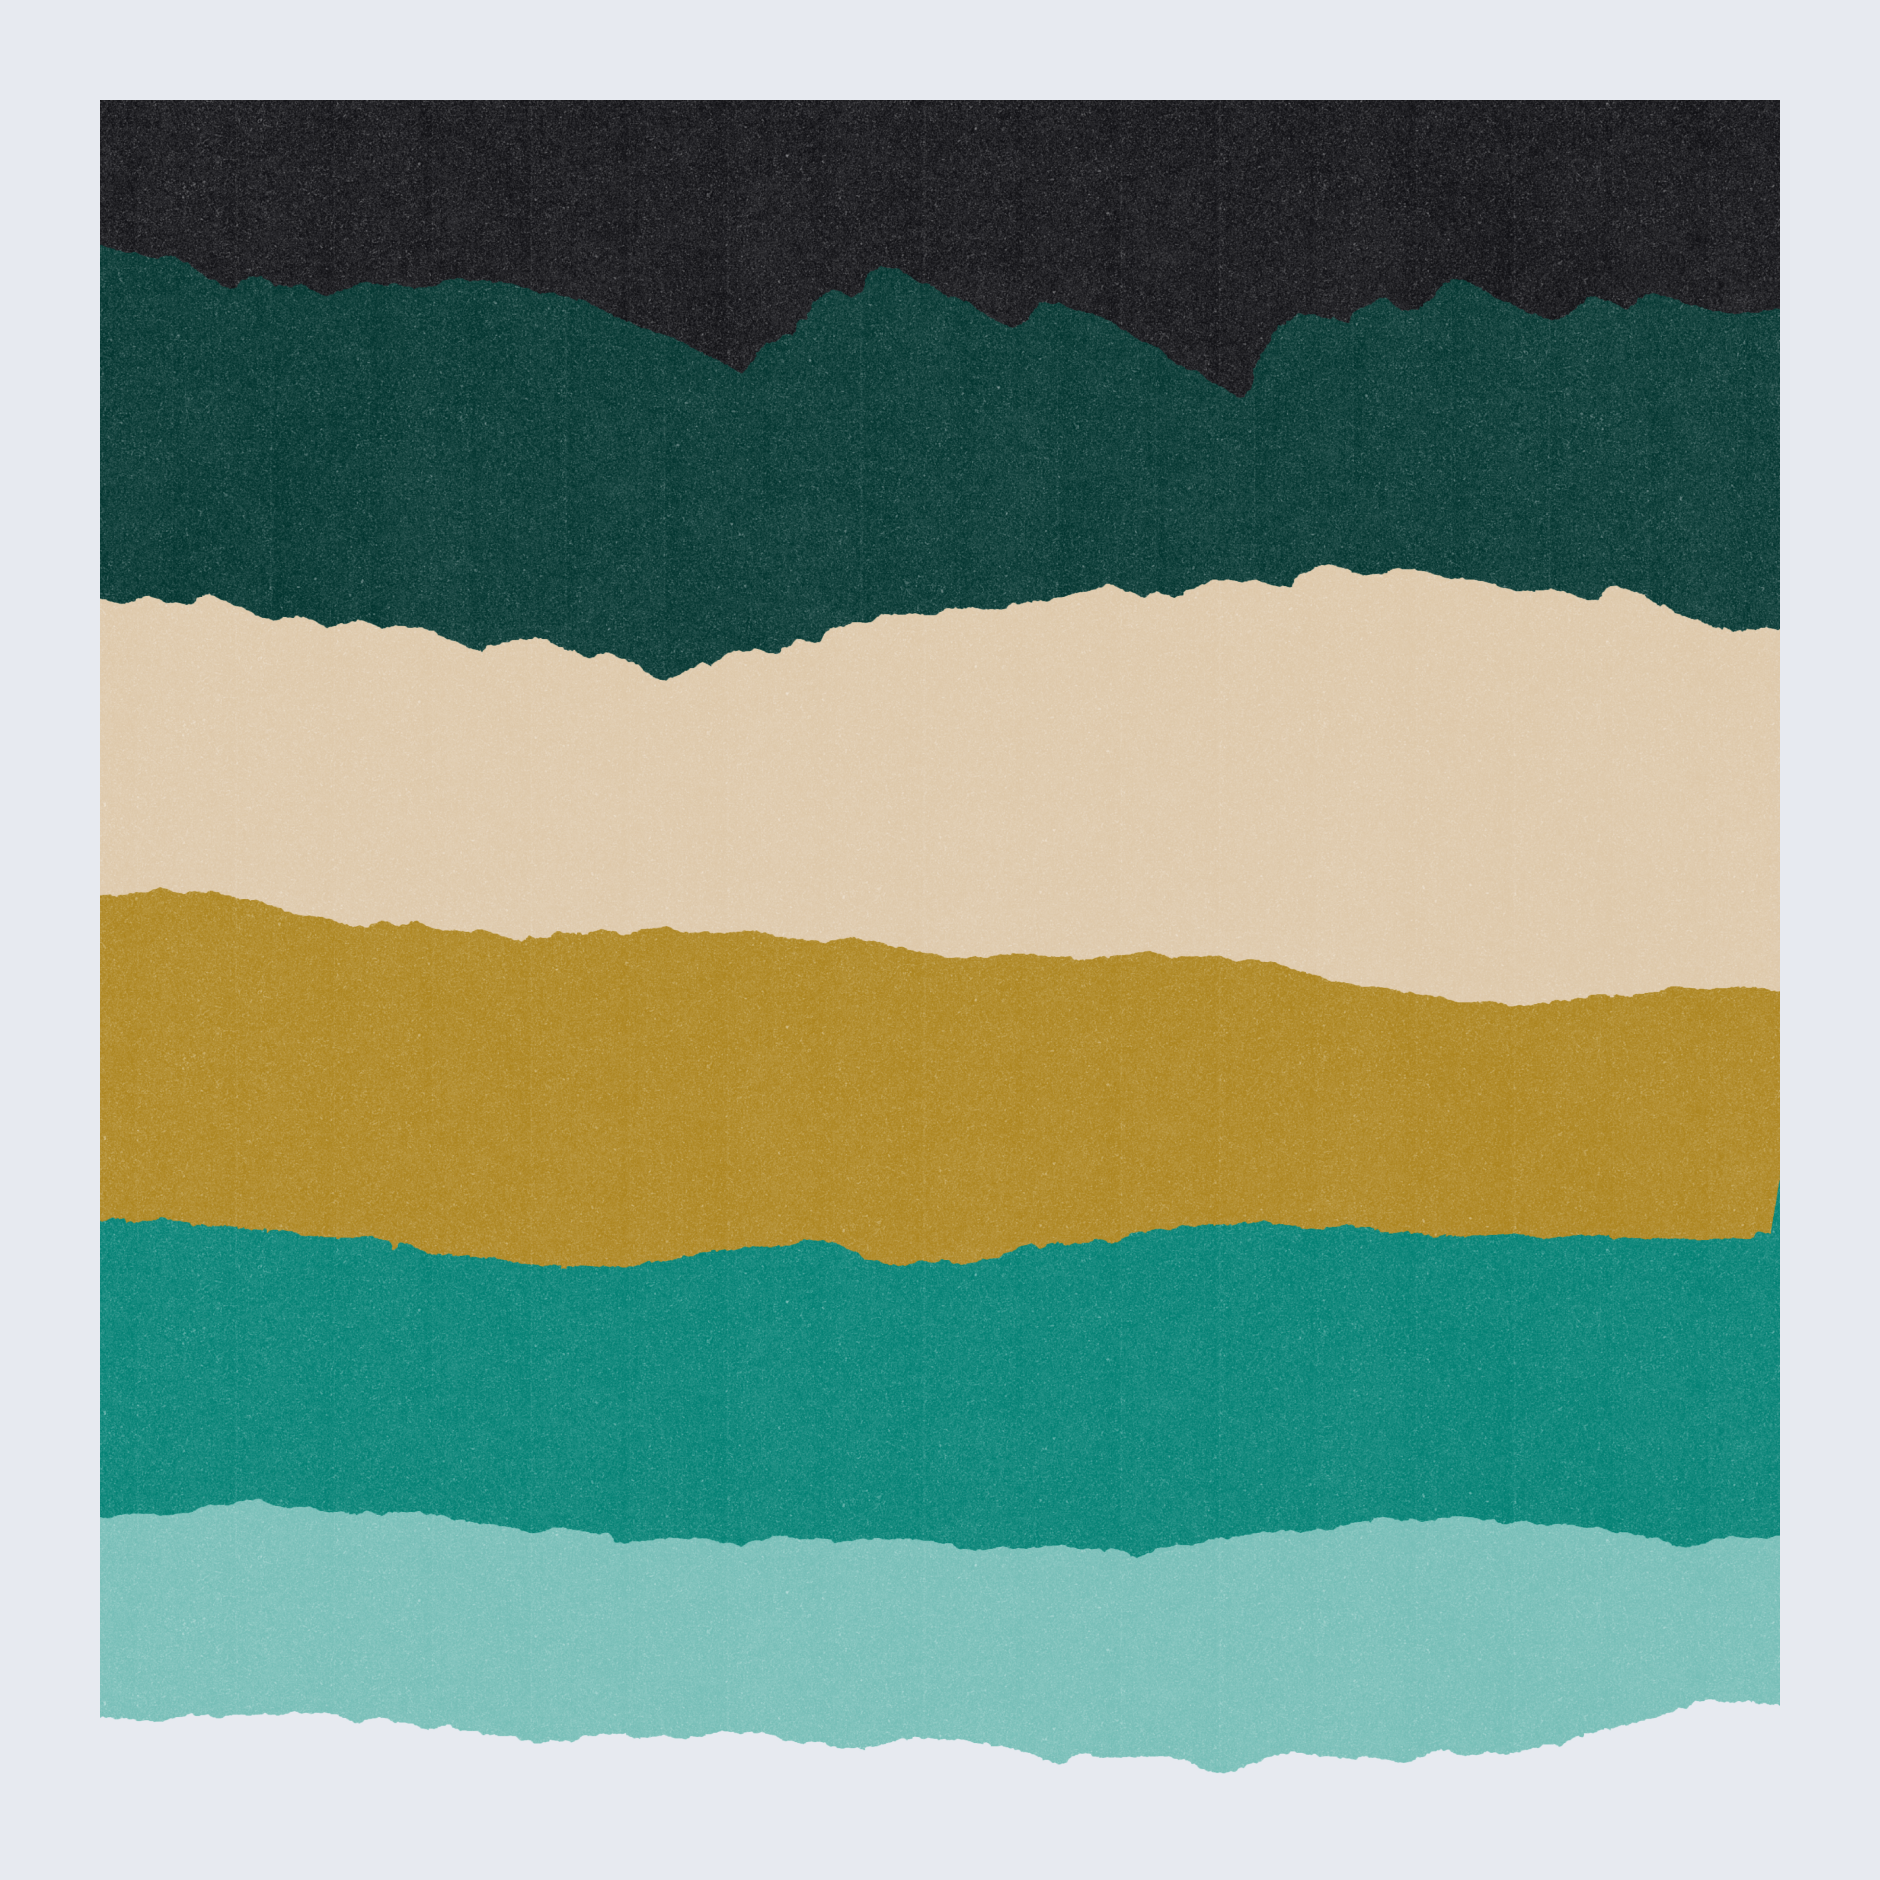 Various paper rips showcasing the color palette. From top to bottom: soft black, dark green, tan, gold, teal, and light teal.